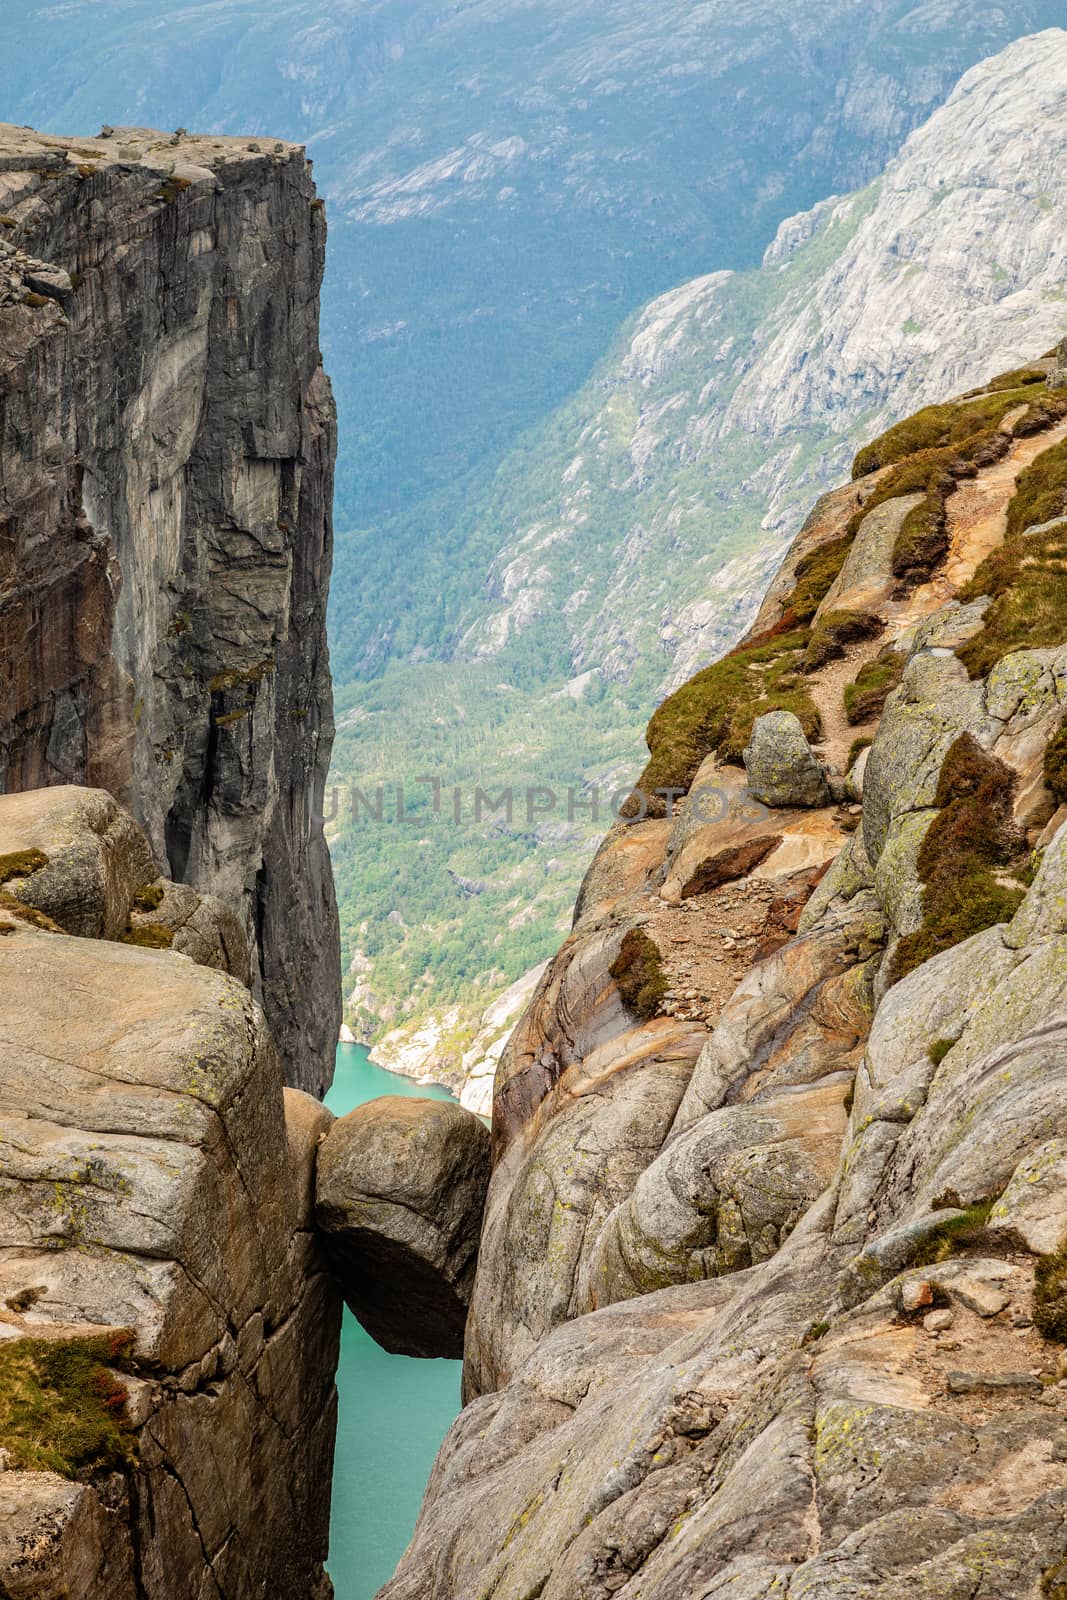 Kjeragbolten, view from the top to the stone stuck between two rocks with fjord in the background, Lysefjord, Norway